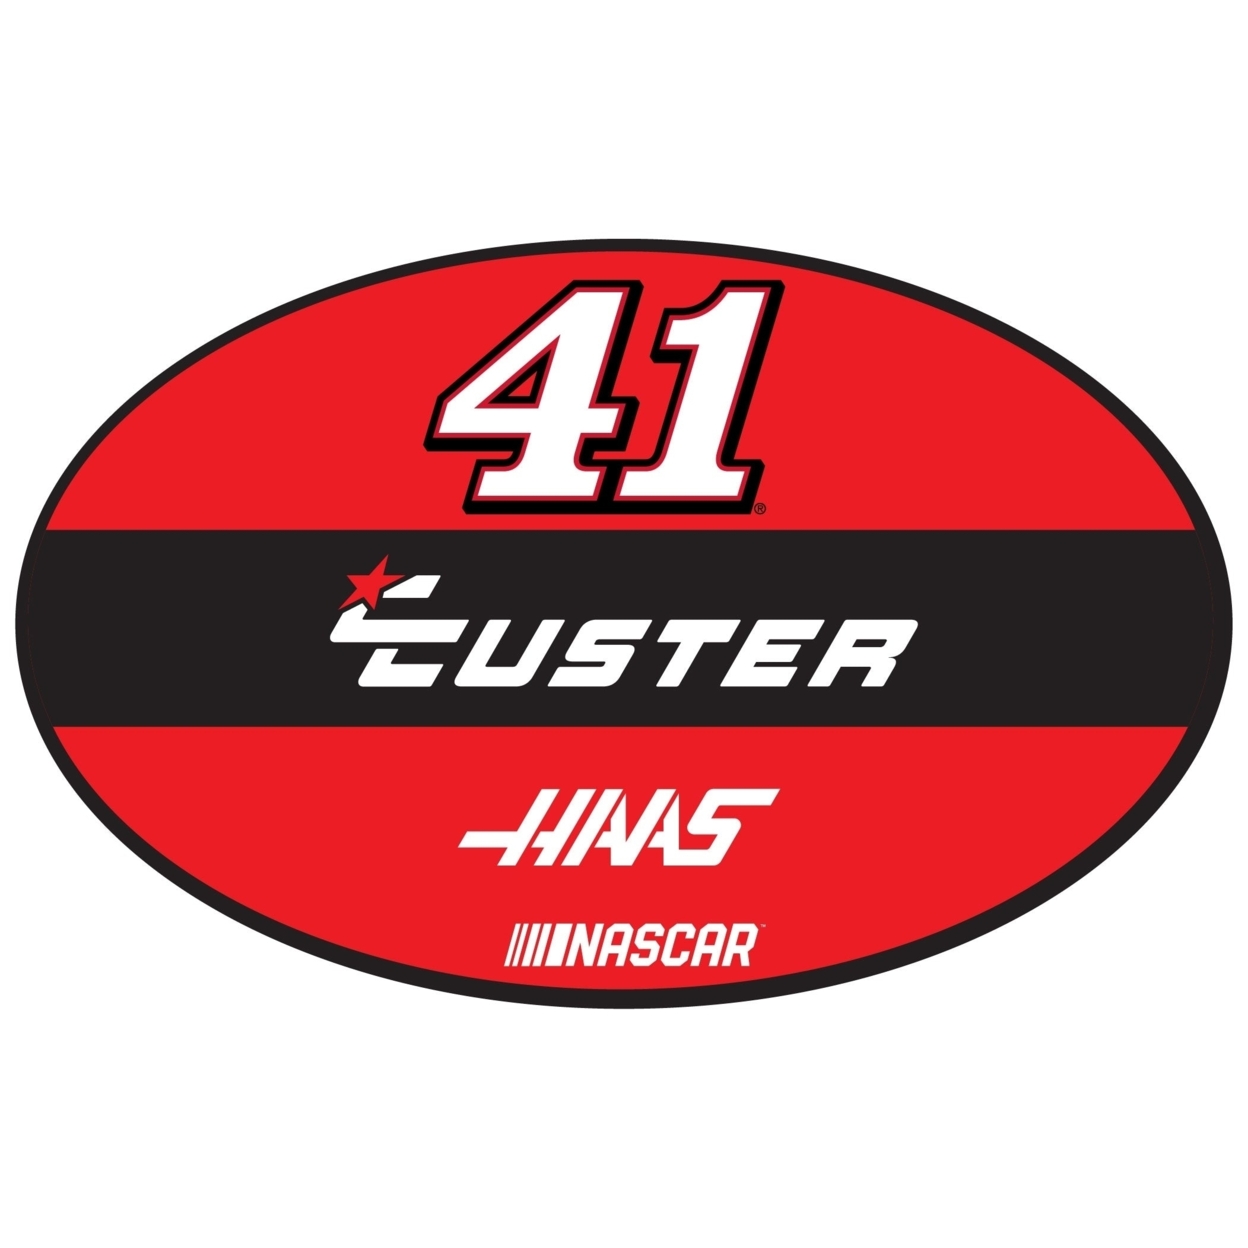 Cole Custer #41 NASCAR Oval Magnet NEW FOR 2020